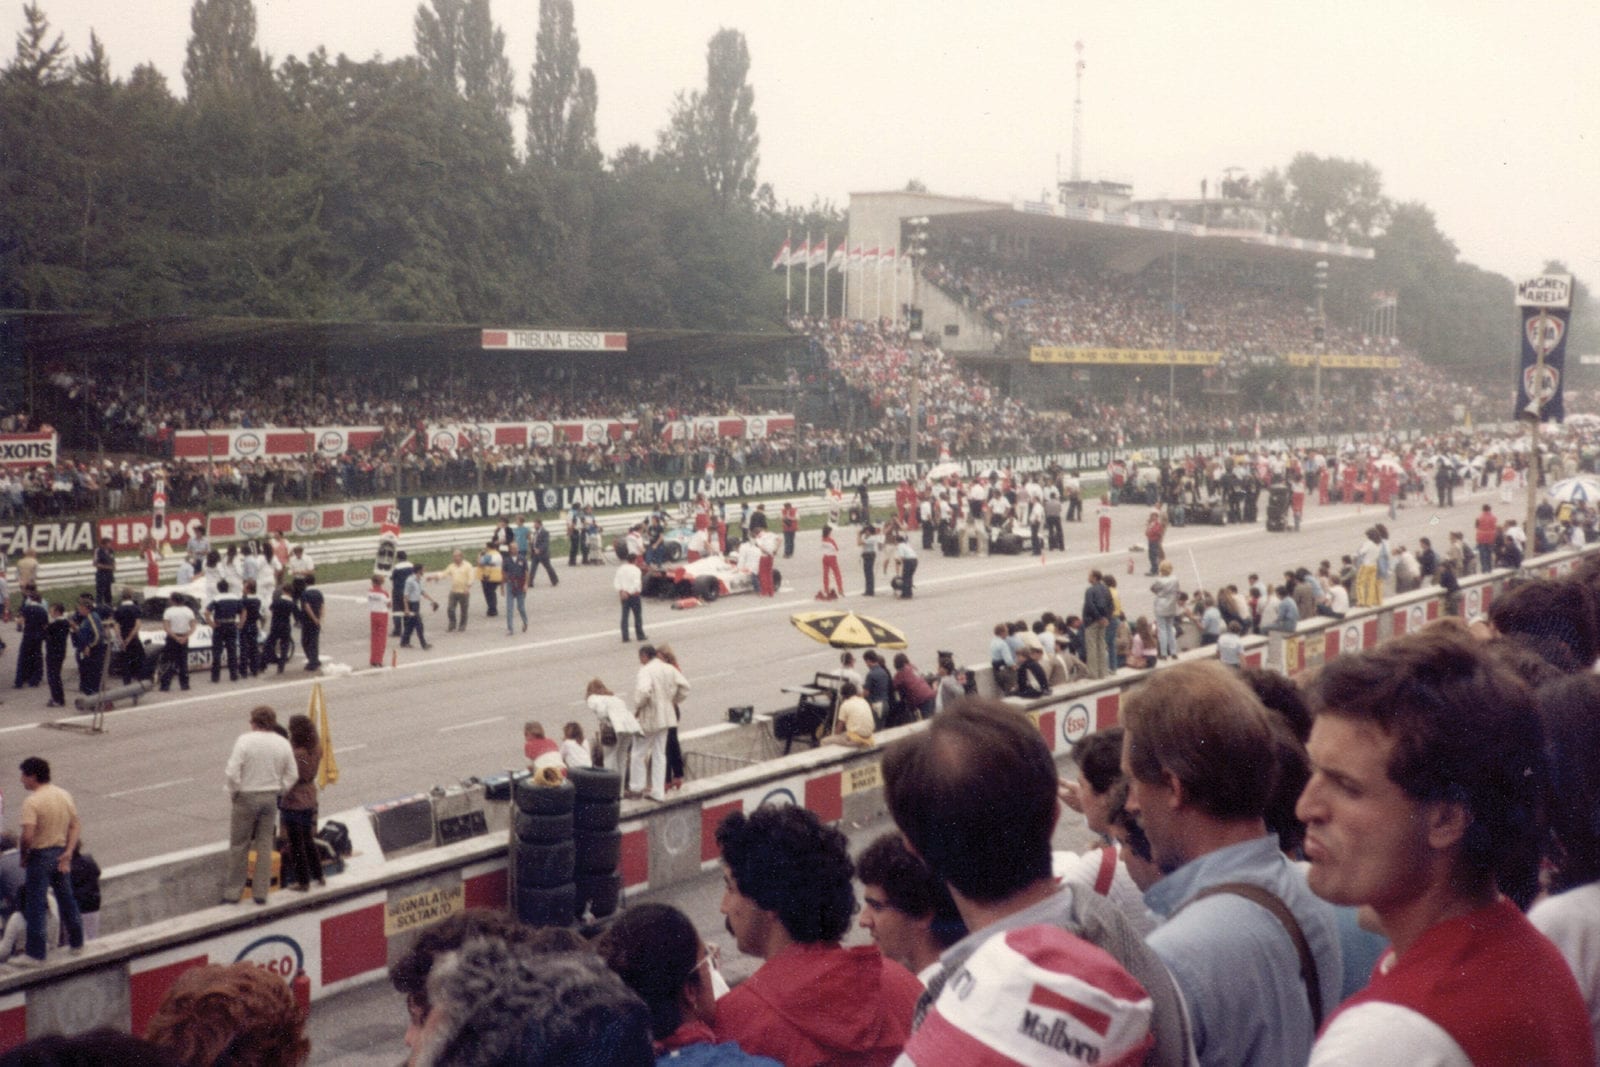 A pre-race view of the 1981 Italian Grand Prix grid from the grandstands